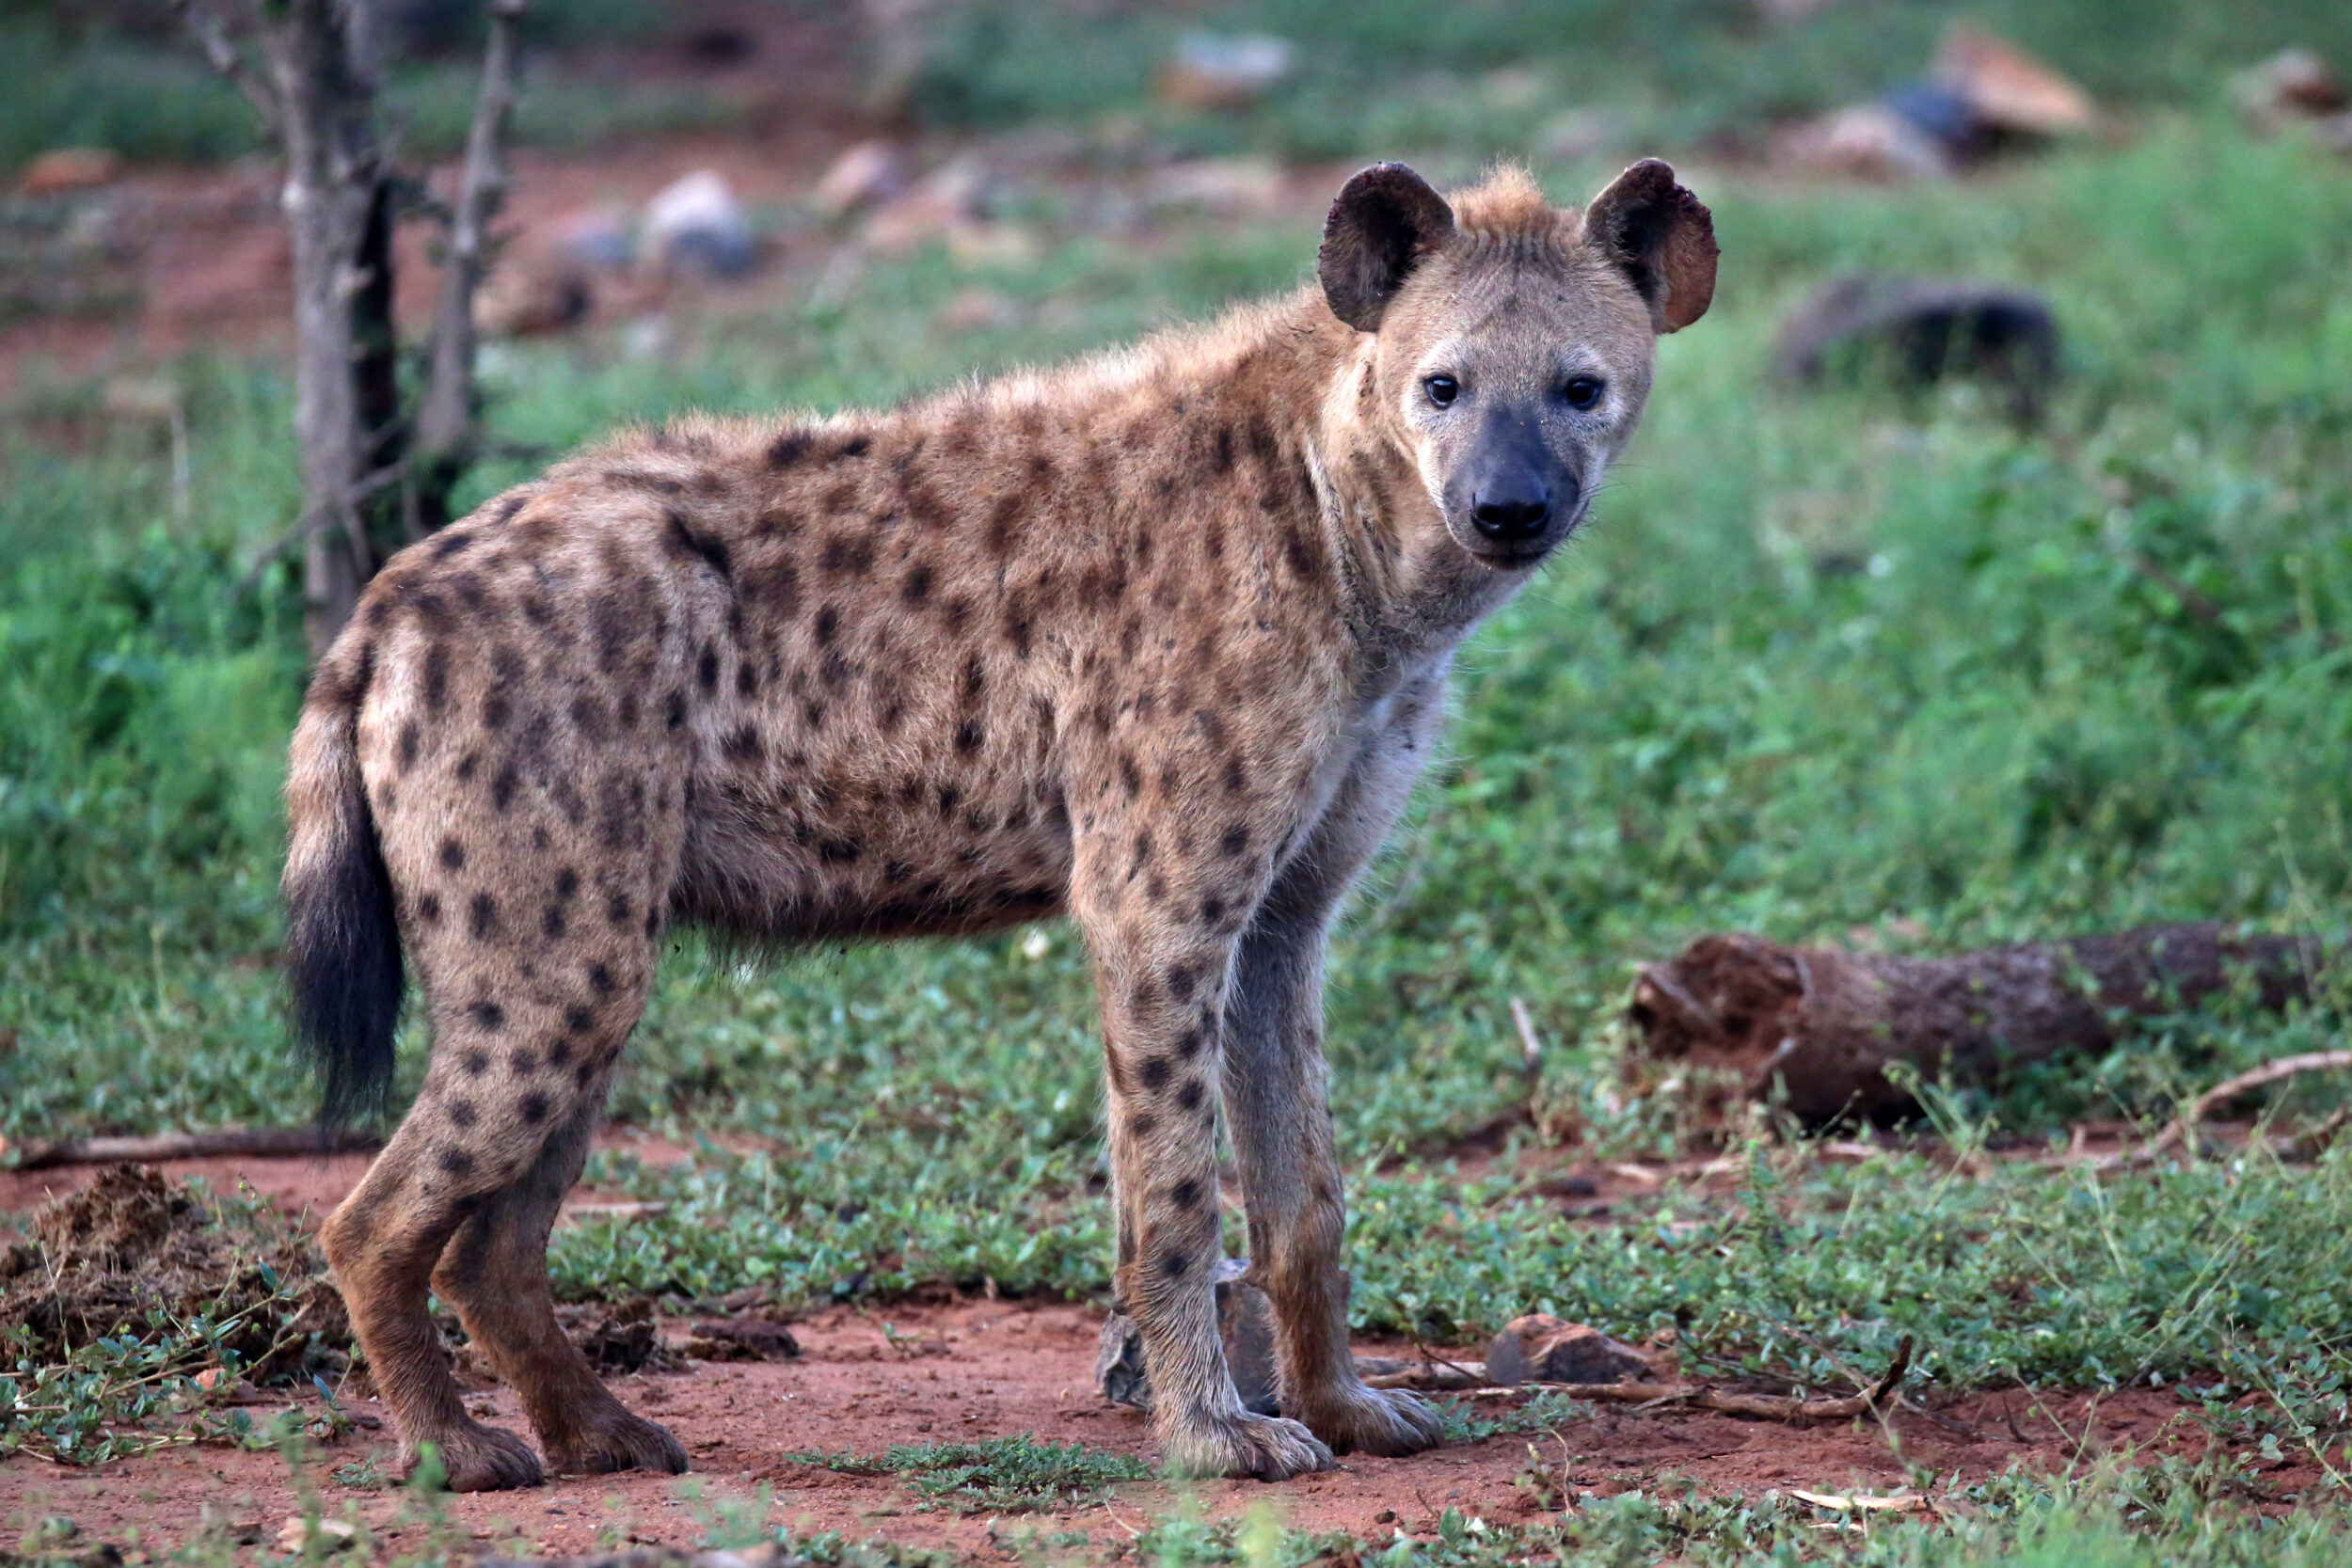 A spotted hyena standing looking towards the camera.